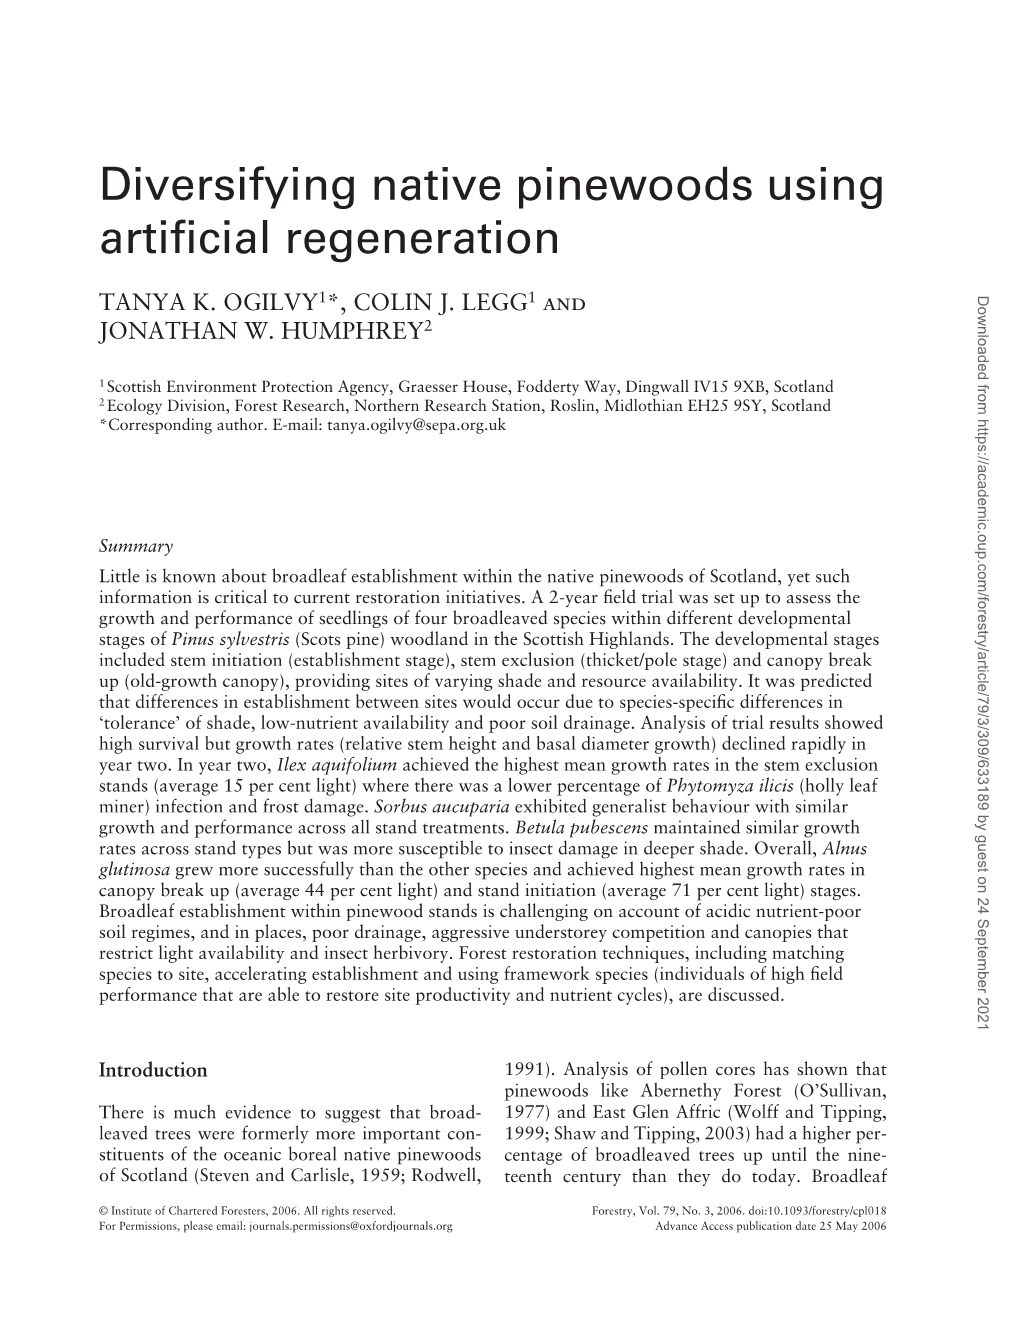 DIVERSIFYING NATIVE PINEWOODS USING ARTIFICIAL REGENERATION 311 Stages: Stand Initiation, Stem Exclusion and Can- Plots)